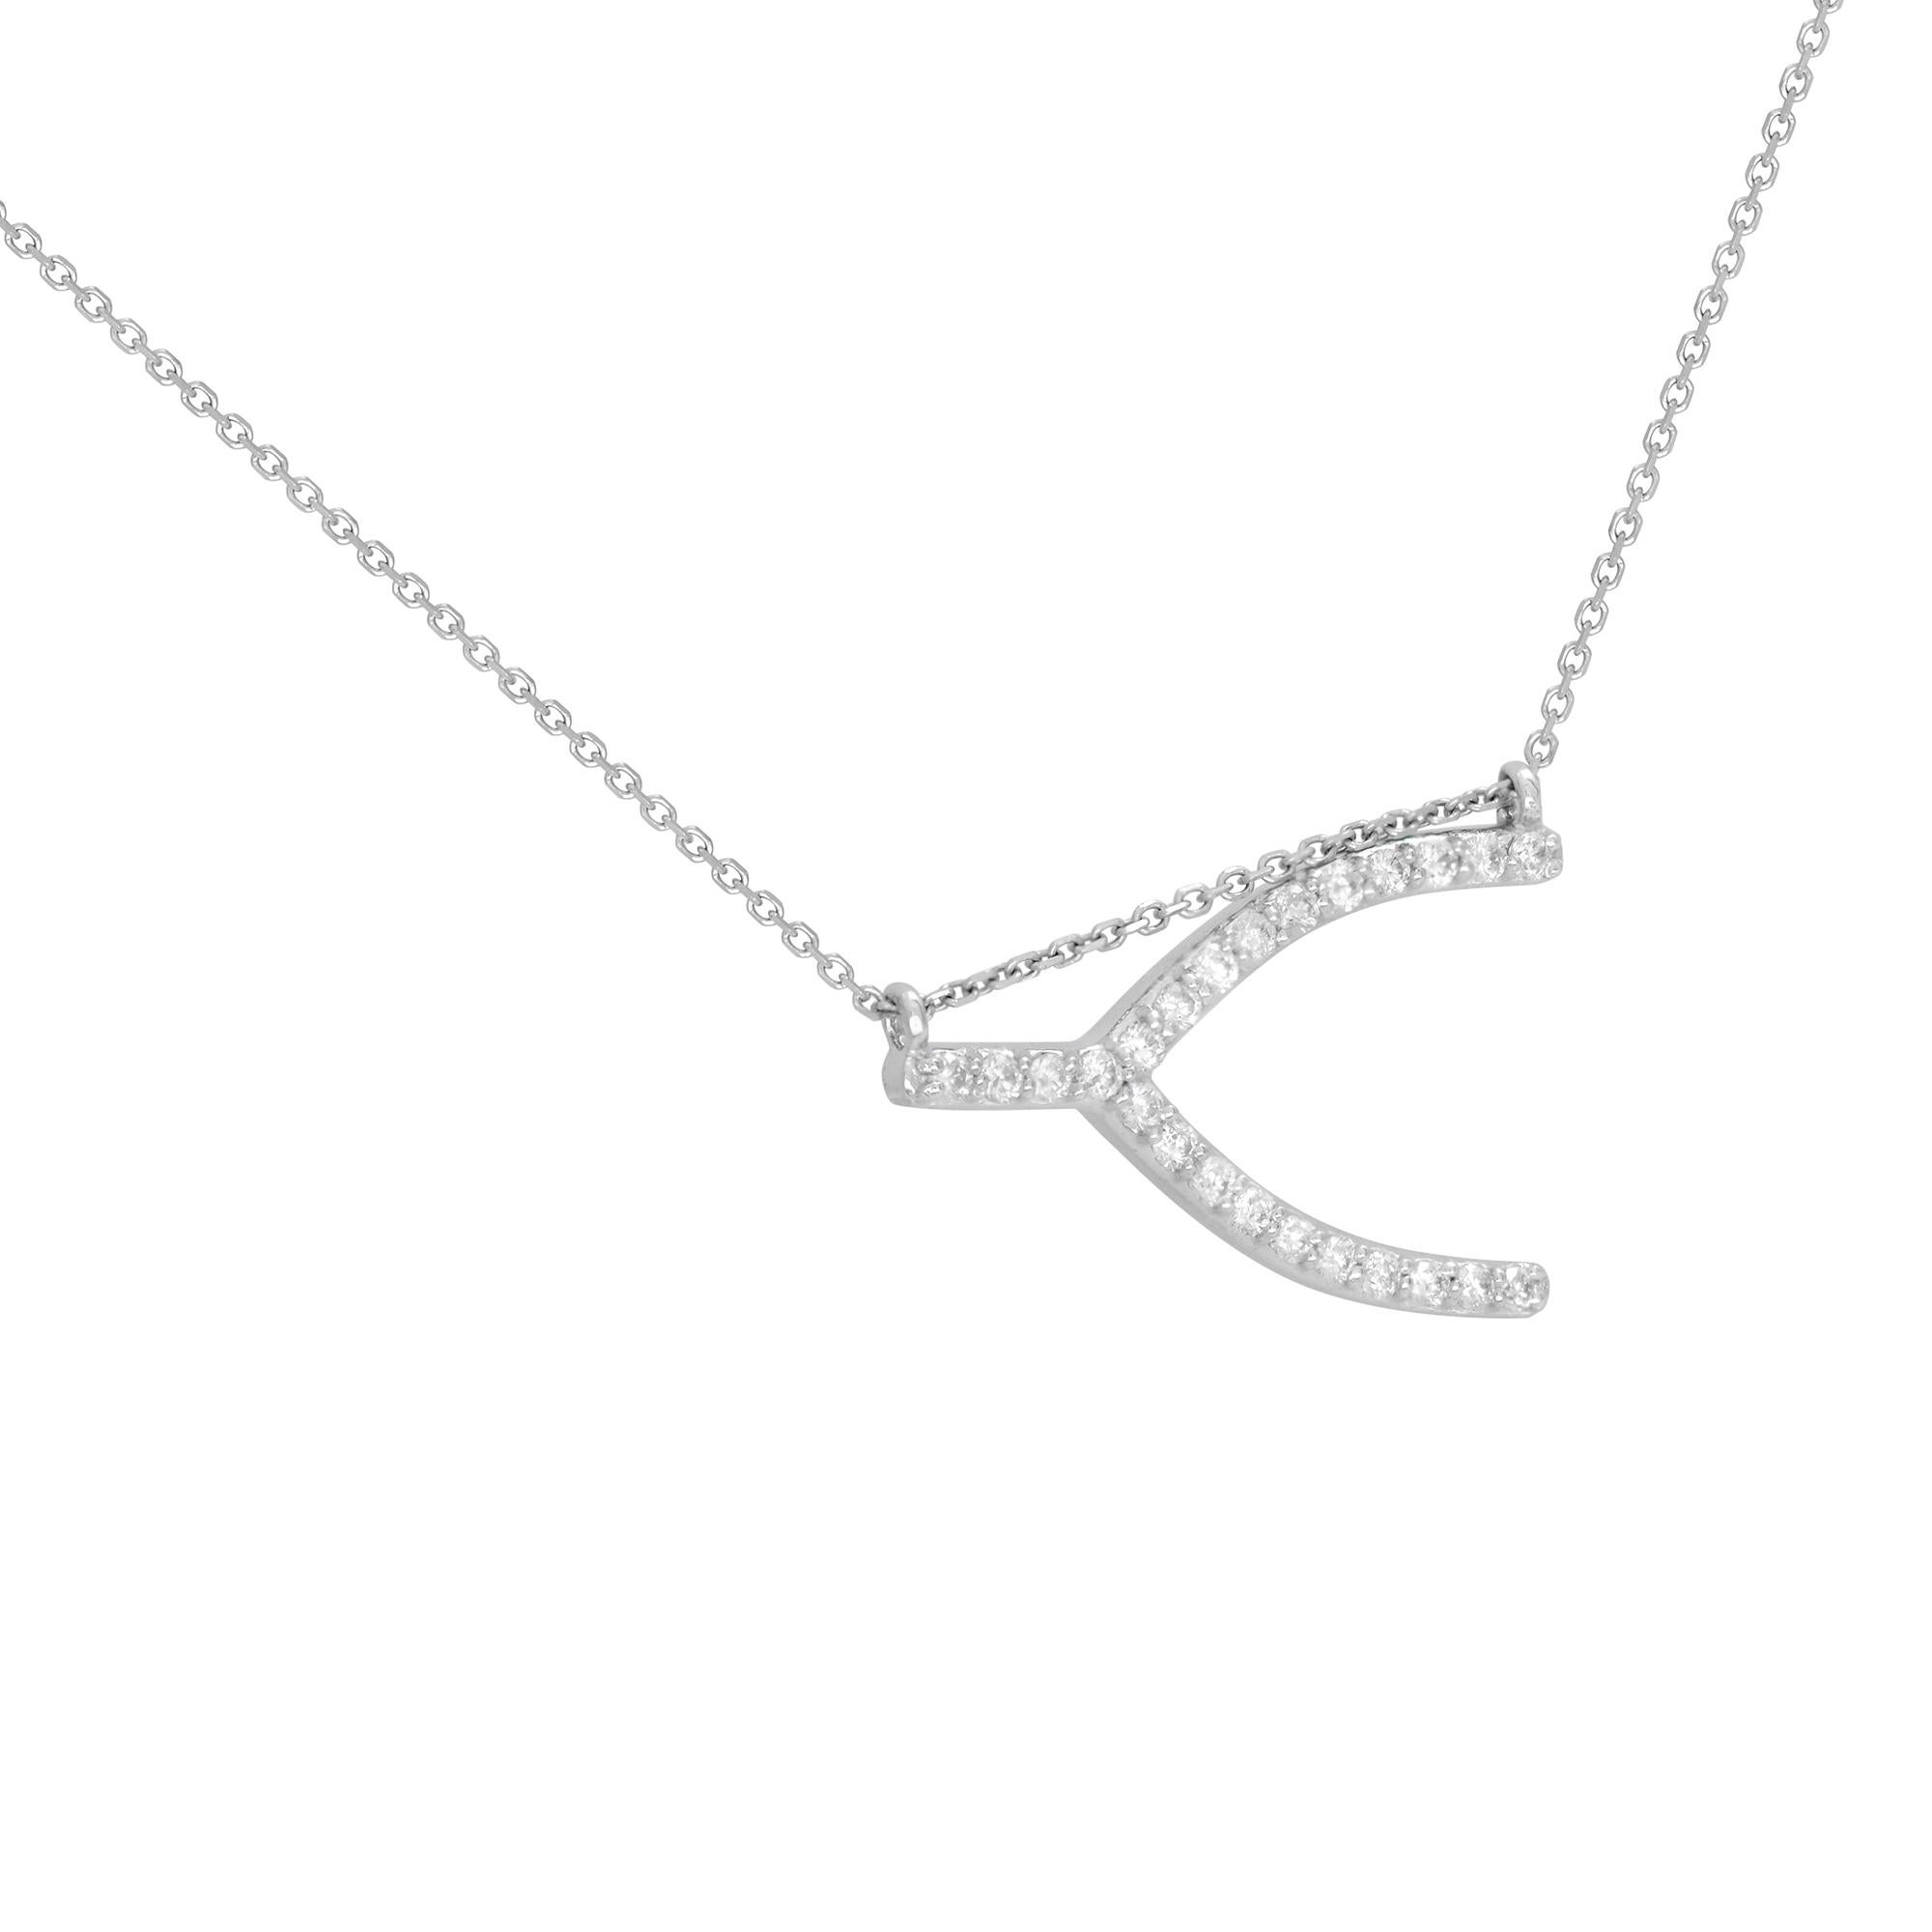 A delicate sideway diamond wishbone necklace crafted in 14k white gold. Set with 0.24 carat of round tiny white diamond. Diamond color G and SI-VS clarity. This necklace symbolizes good fortune and hope. Chain length: 18 inches. Comes with a